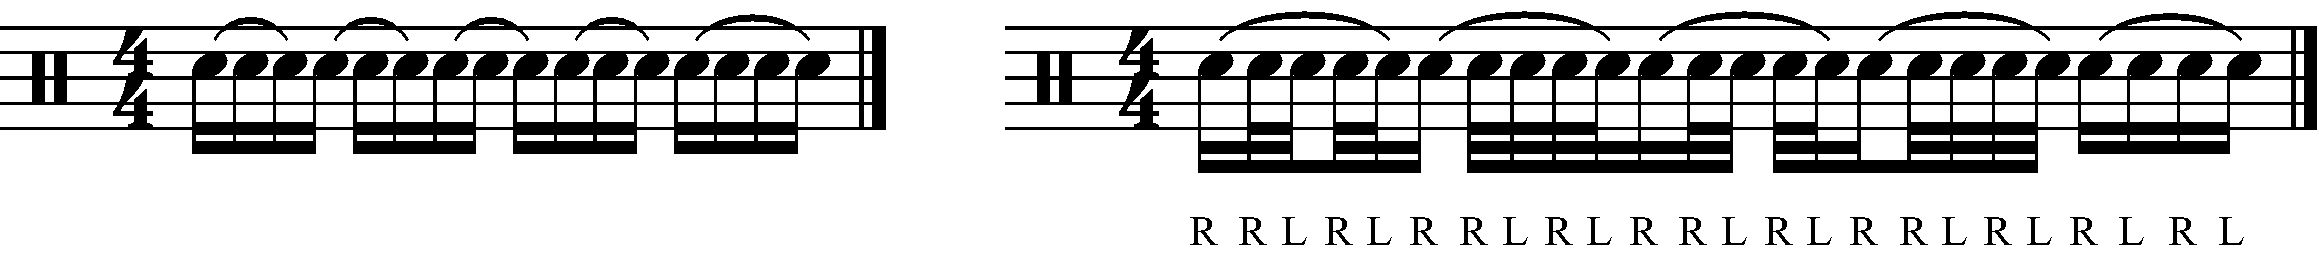 The base rhythm for the fill